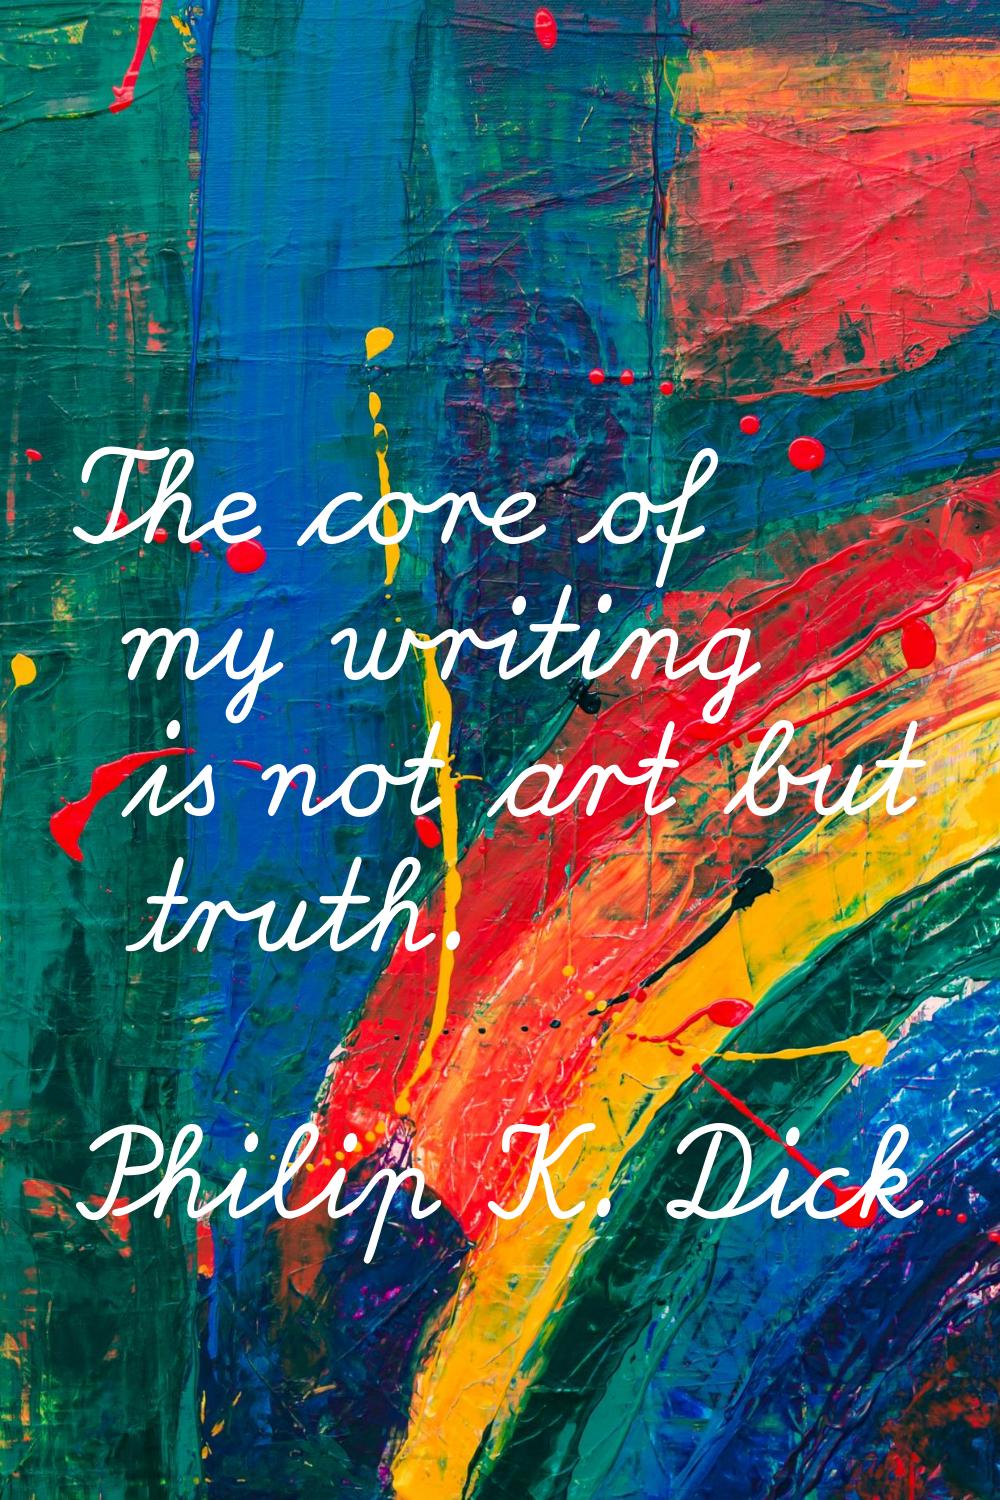 The core of my writing is not art but truth.